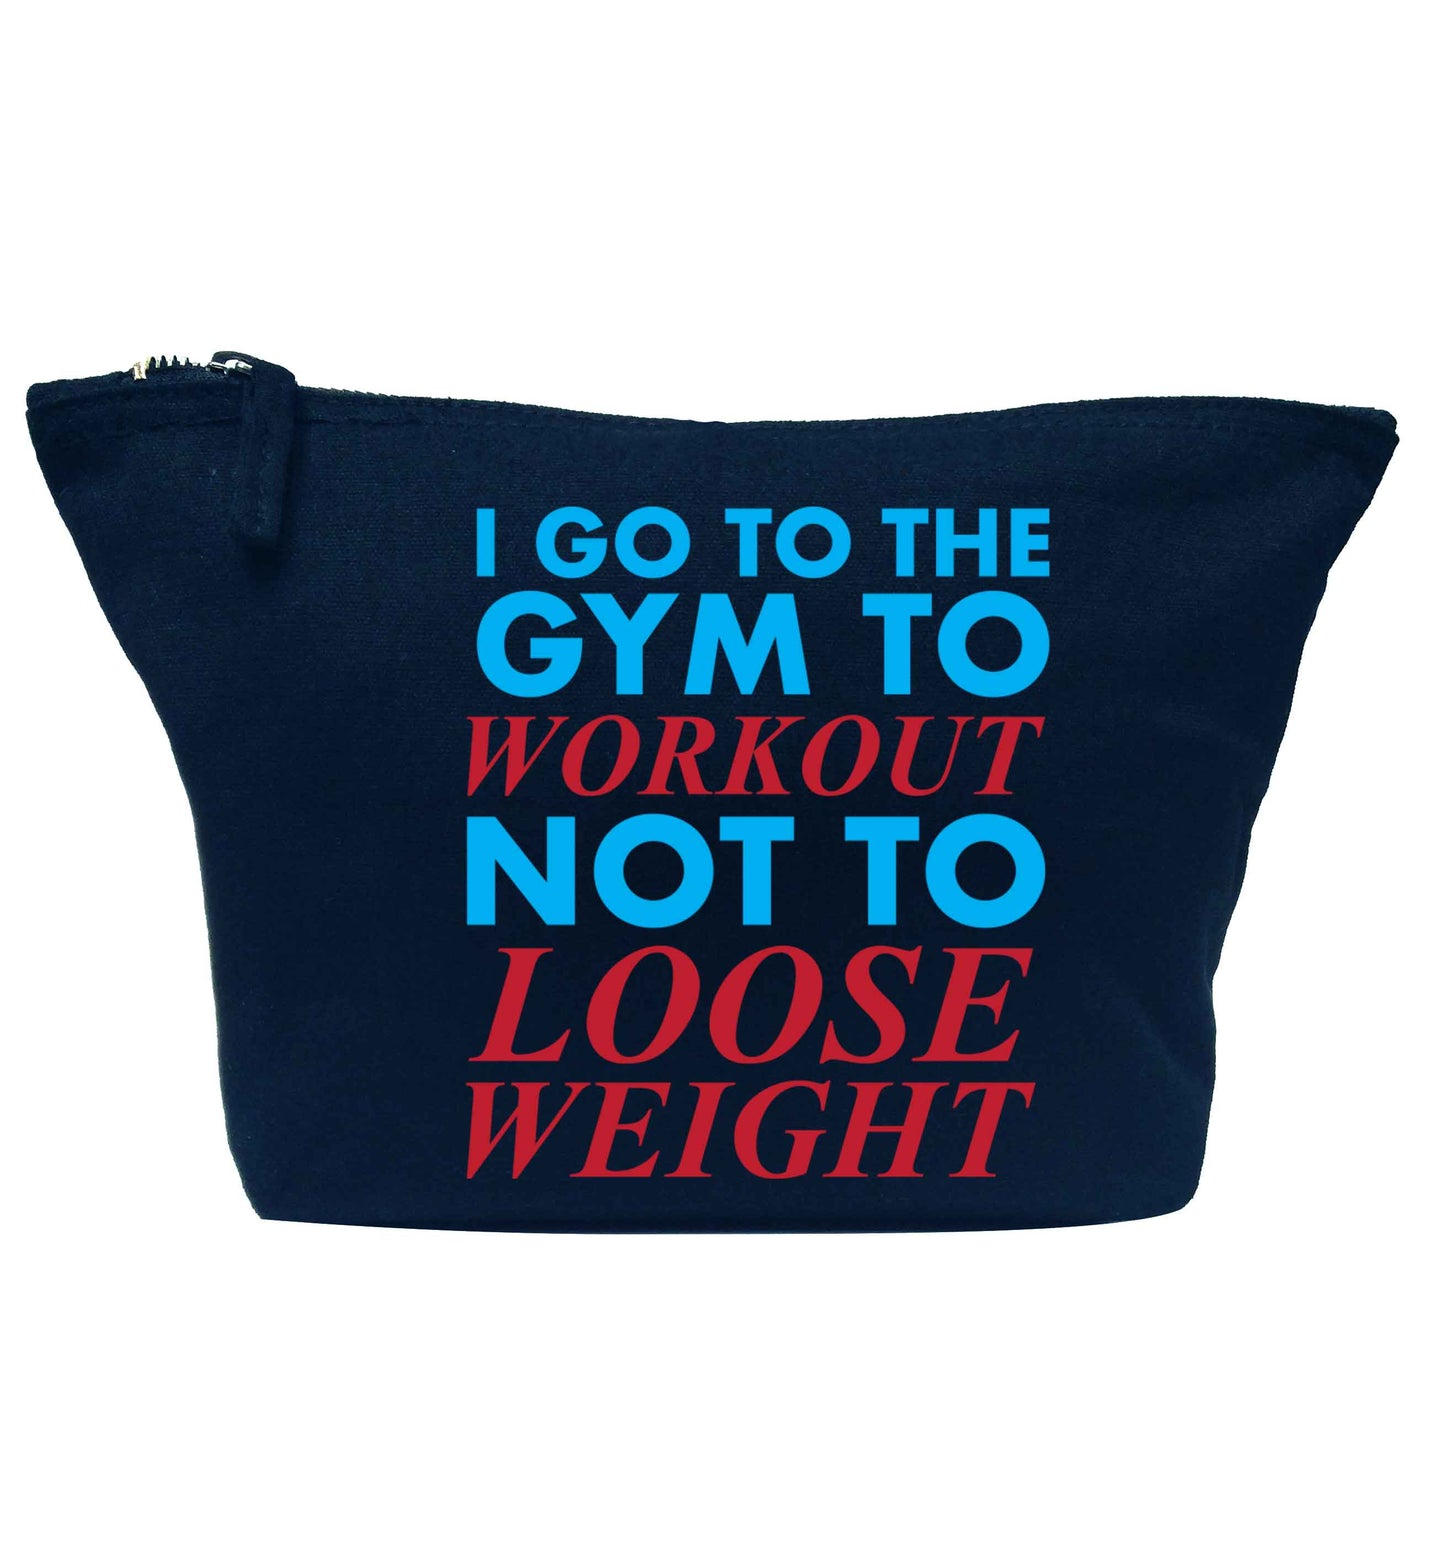 I go to the gym to workout not to loose weight navy makeup bag